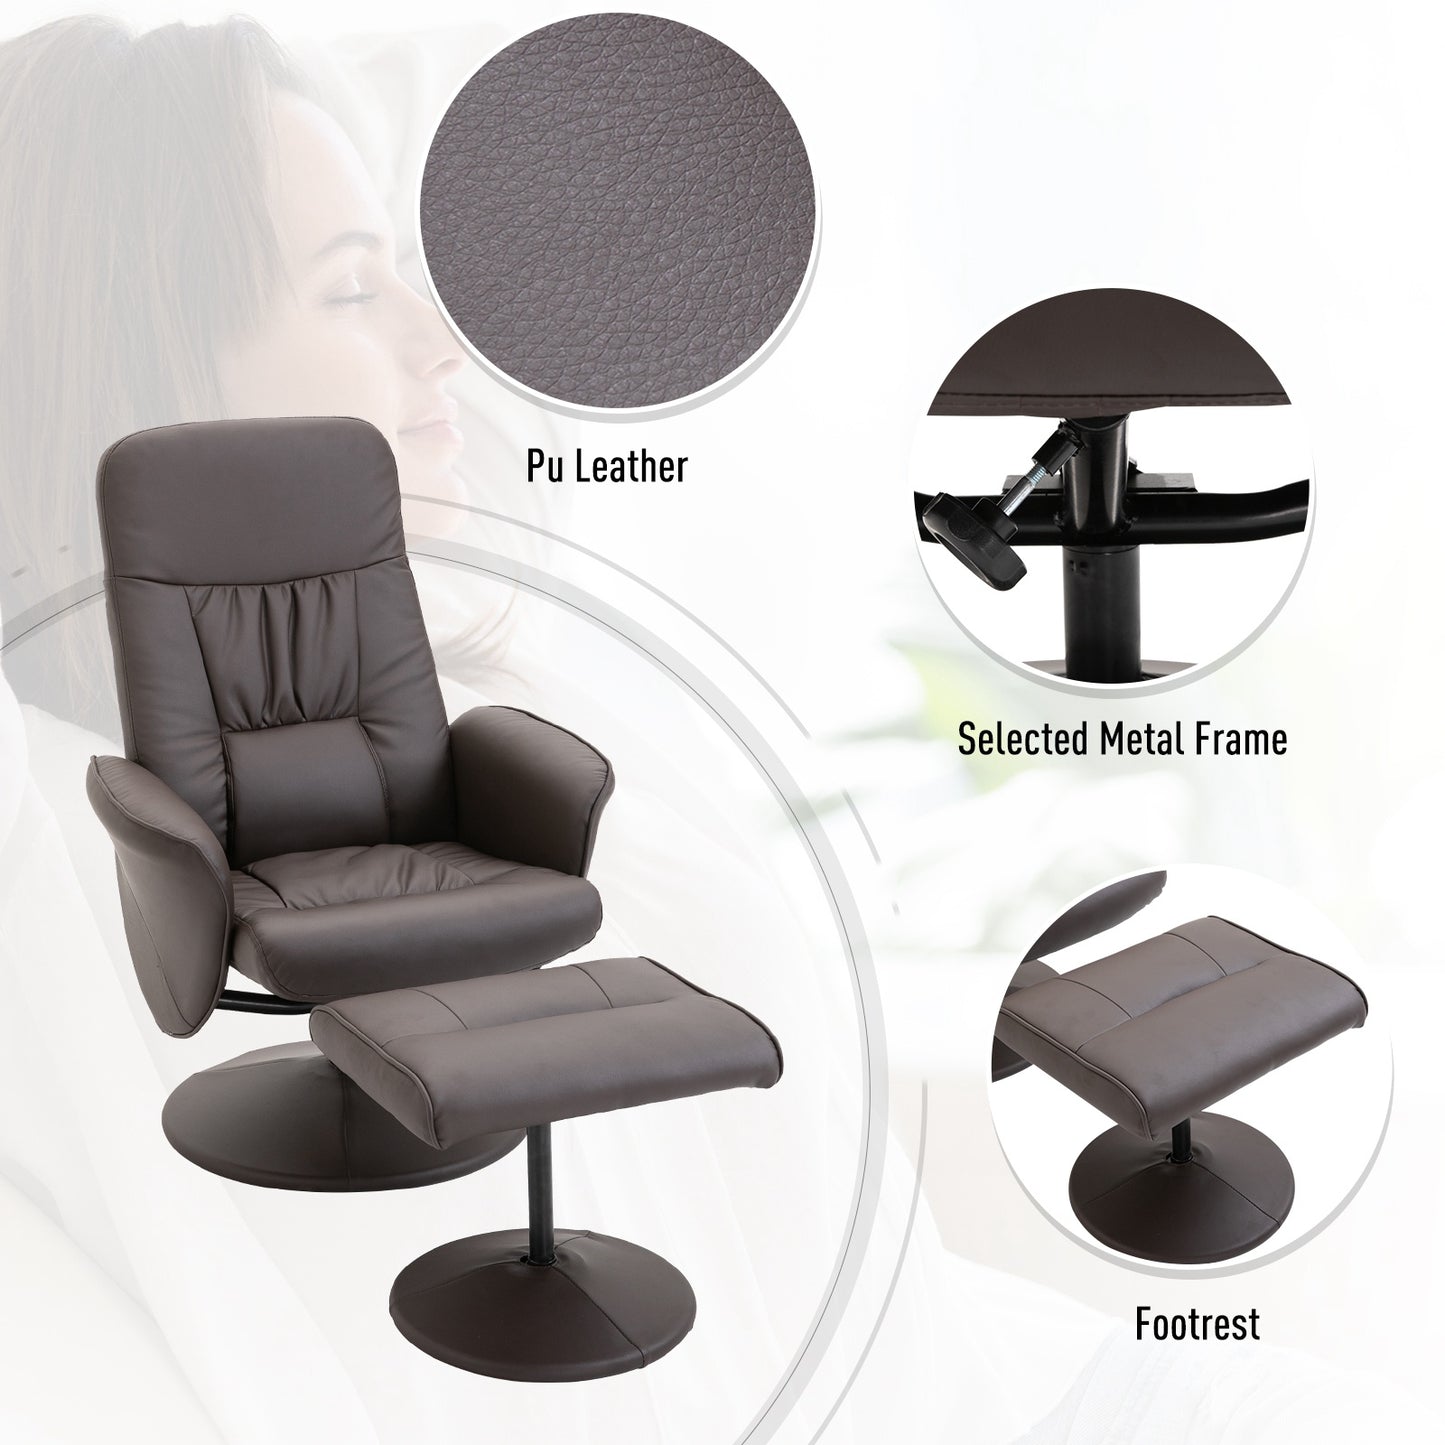 HOMCOM PU Leather Recliner Armchair & Footrest 2 Pcs Duo Set Brown